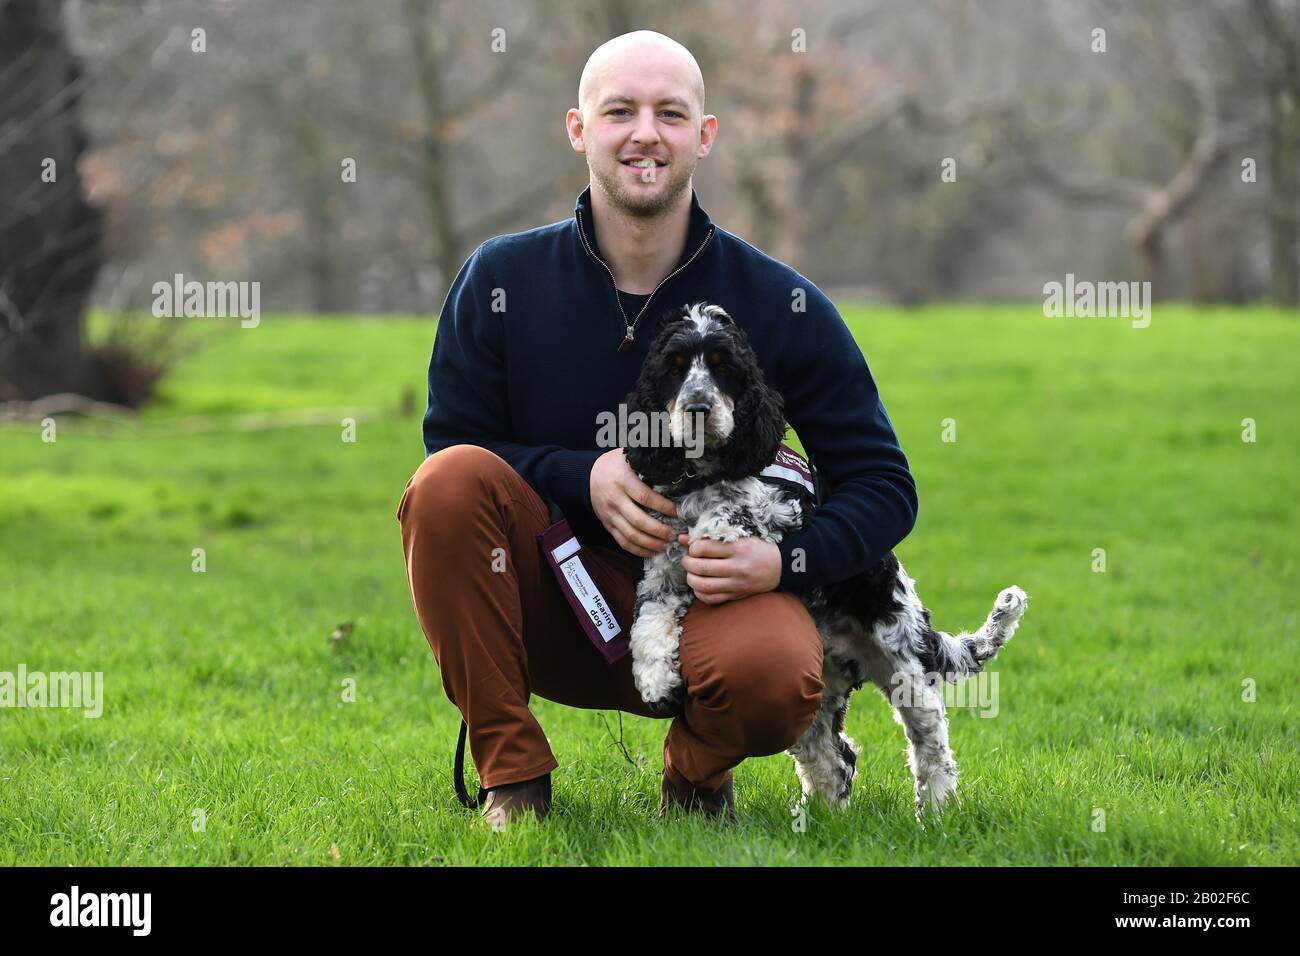 Graham Sage with his dog Jovi, one of the finalists for Friends for Life 2020, at a launch event for this year's Crufts and Friends for Life in Green Park, London. Stock Photo